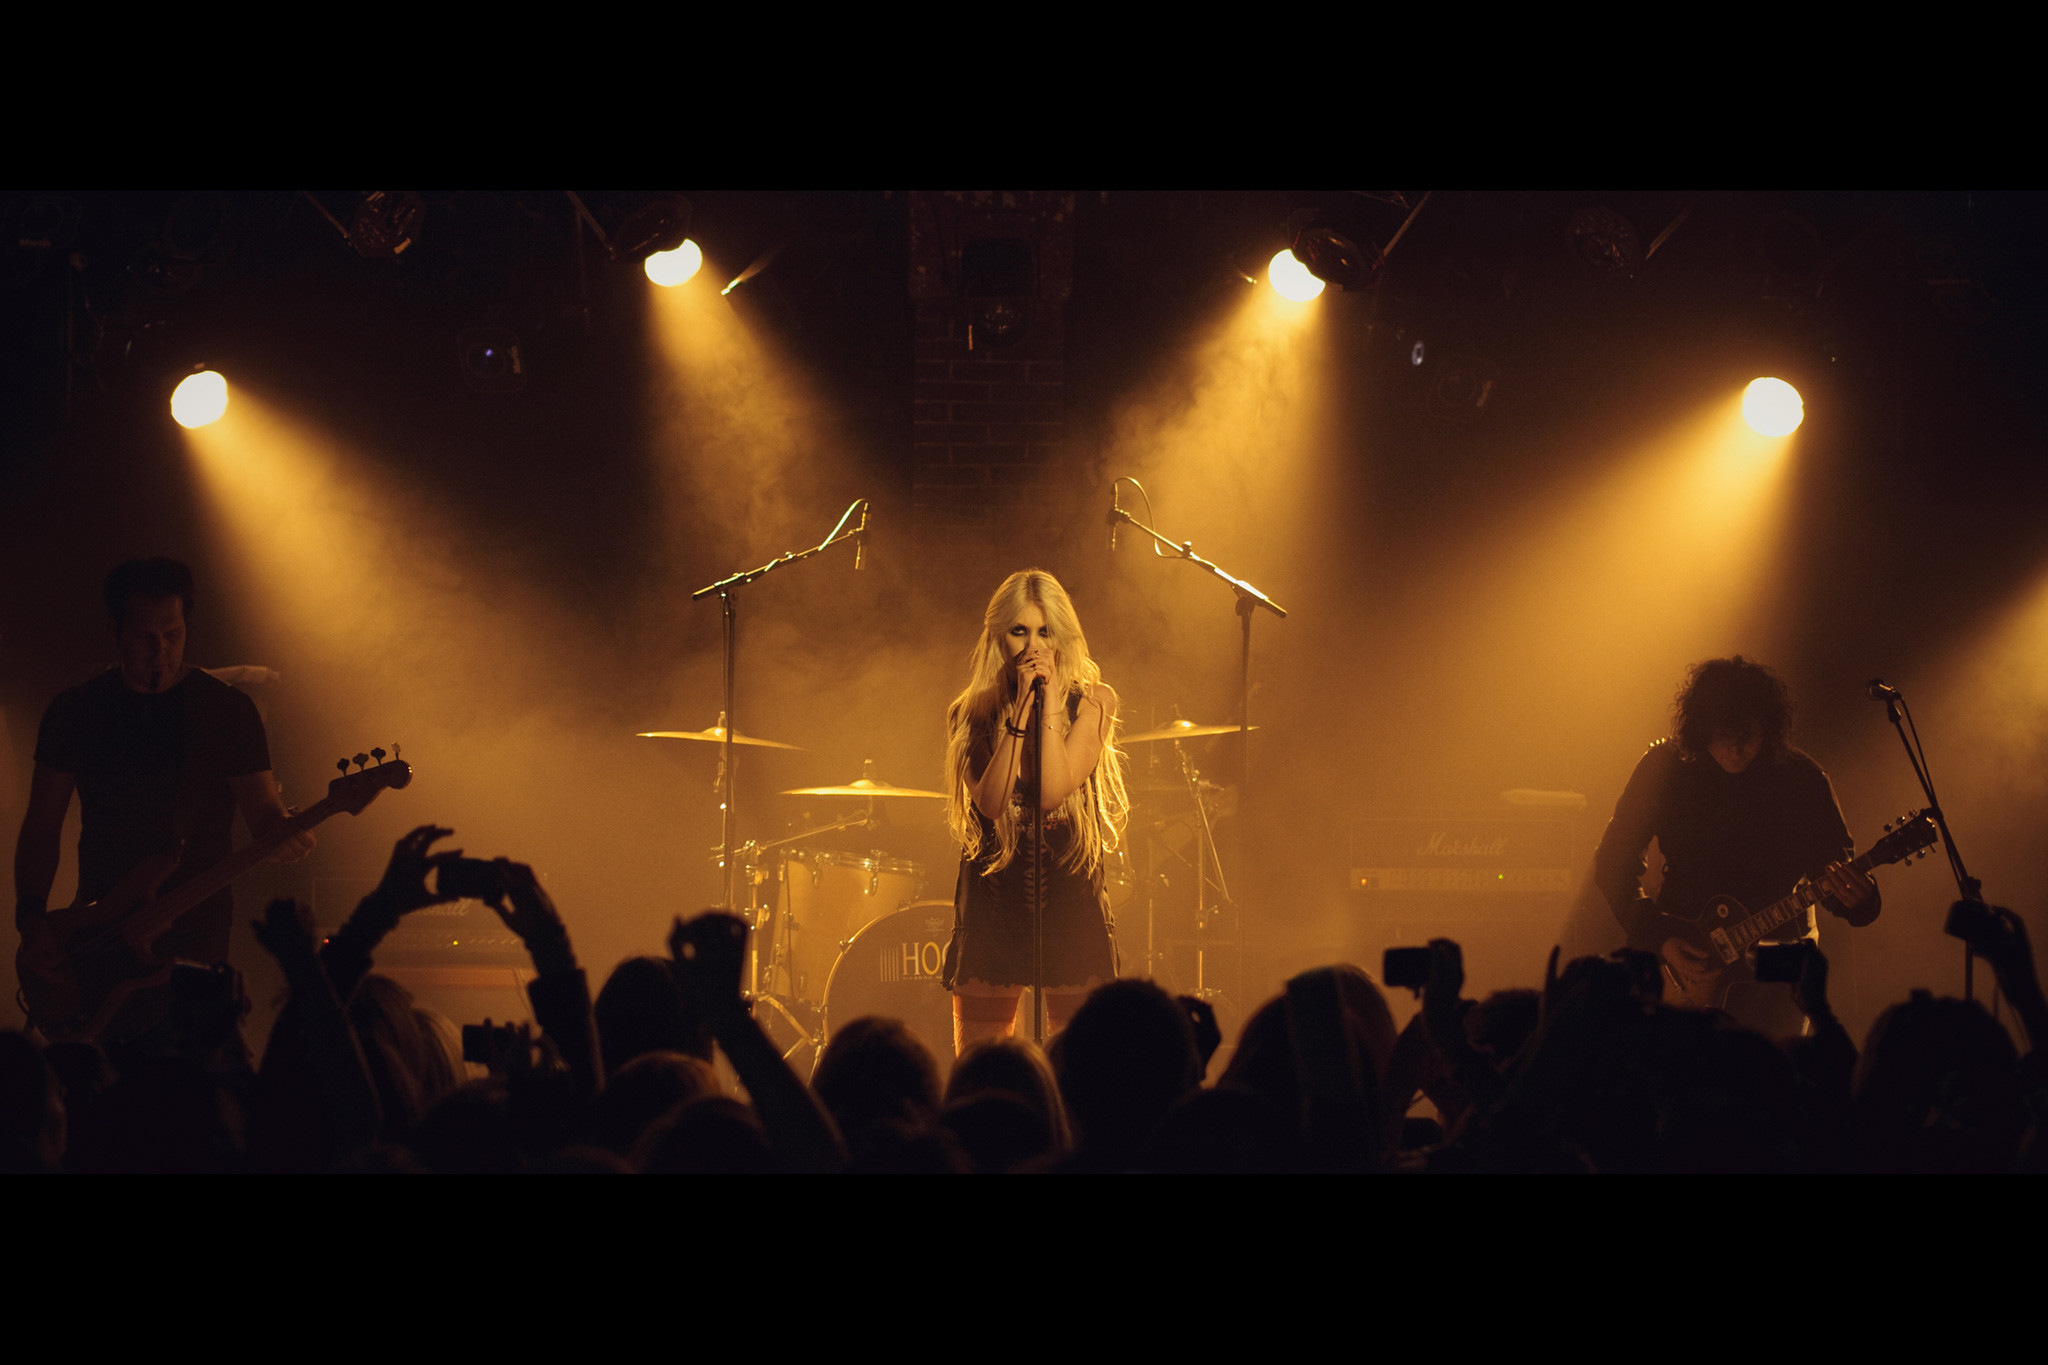 2048x1365 The Pretty Reckless Concert Photography